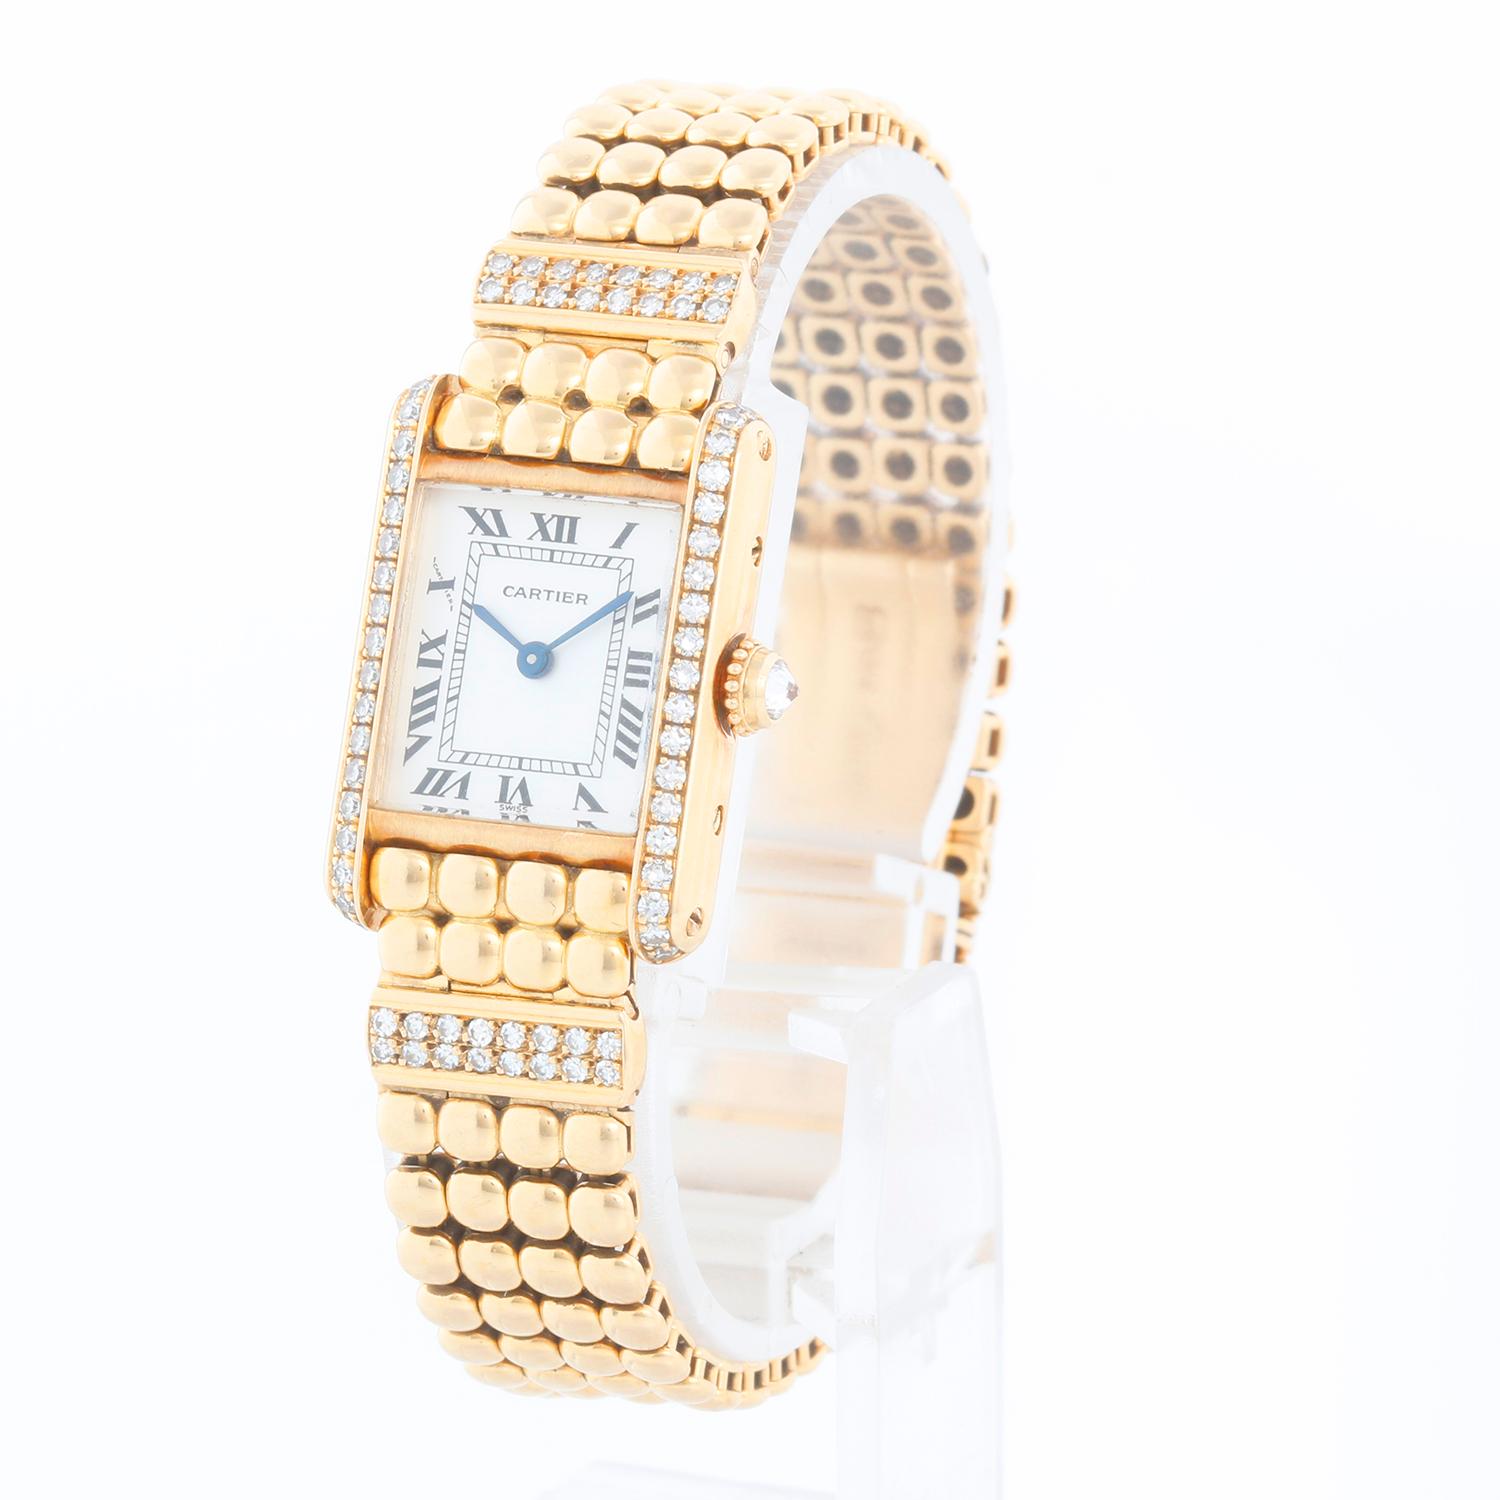 Rare & Unusual Cartier 18K Yellow Gold Tank Ladies Watch 8057 - Quartz. Factory 18K yellow gold with pave  diamond case ( 18 x 25mm ). Silver tone dial with black roman numerals. Ball link style bracelet with double row bar of diamonds across each